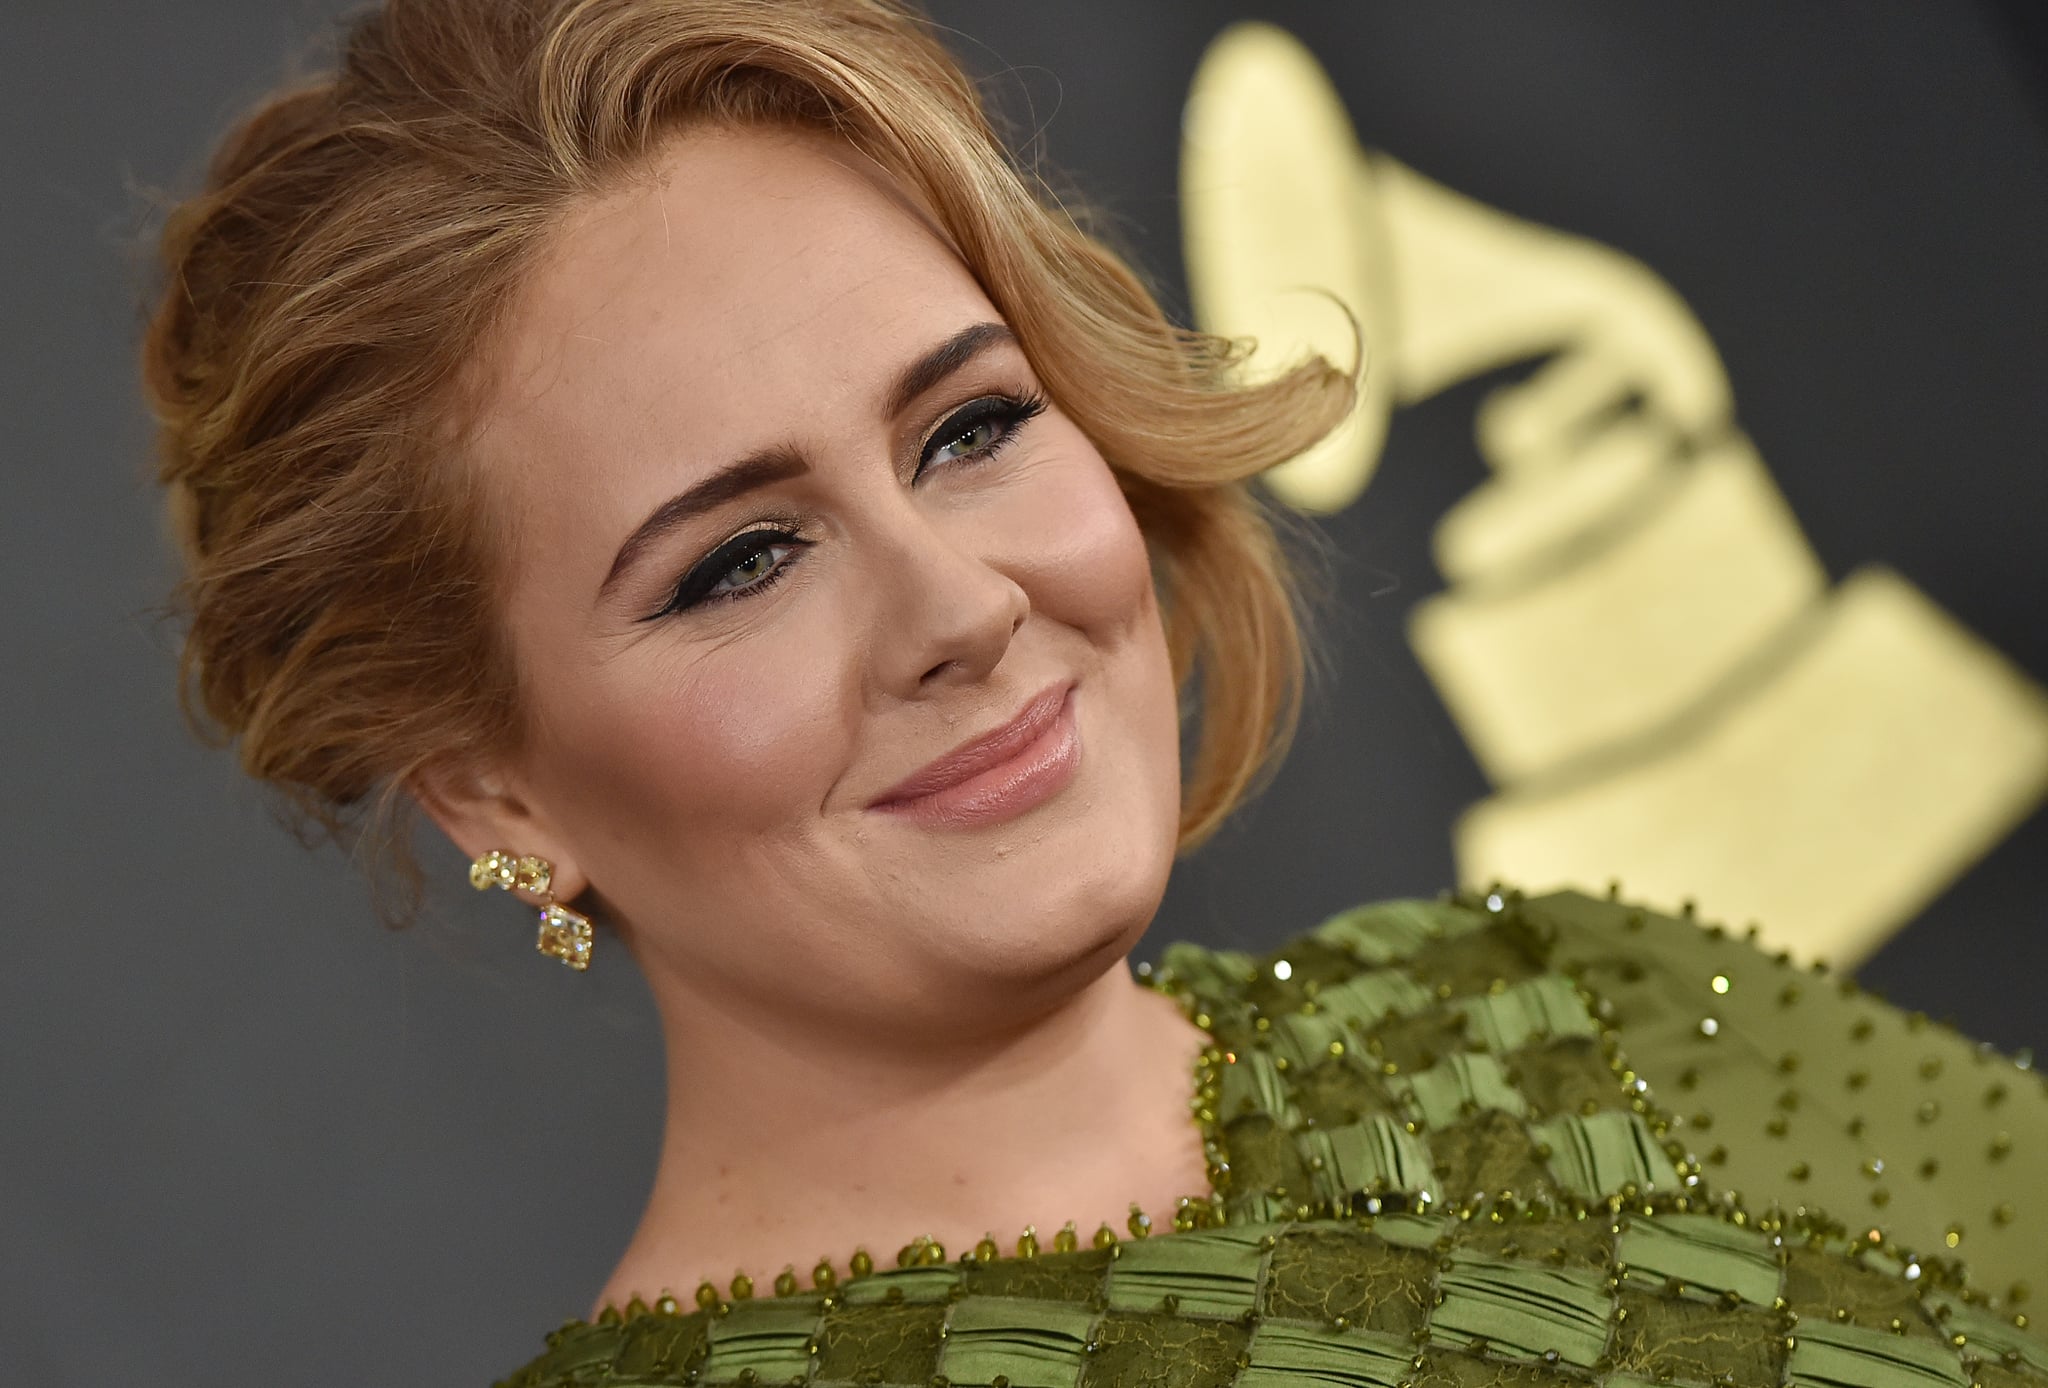 LOS ANGELES, CA - FEBRUARY 12:  Recording artist Adele attends the 59th GRAMMY Awards at STAPLES Centre on February 12, 2017 in Los Angeles, California.  (Photo by Axelle/Bauer-Griffin/FilmMagic)